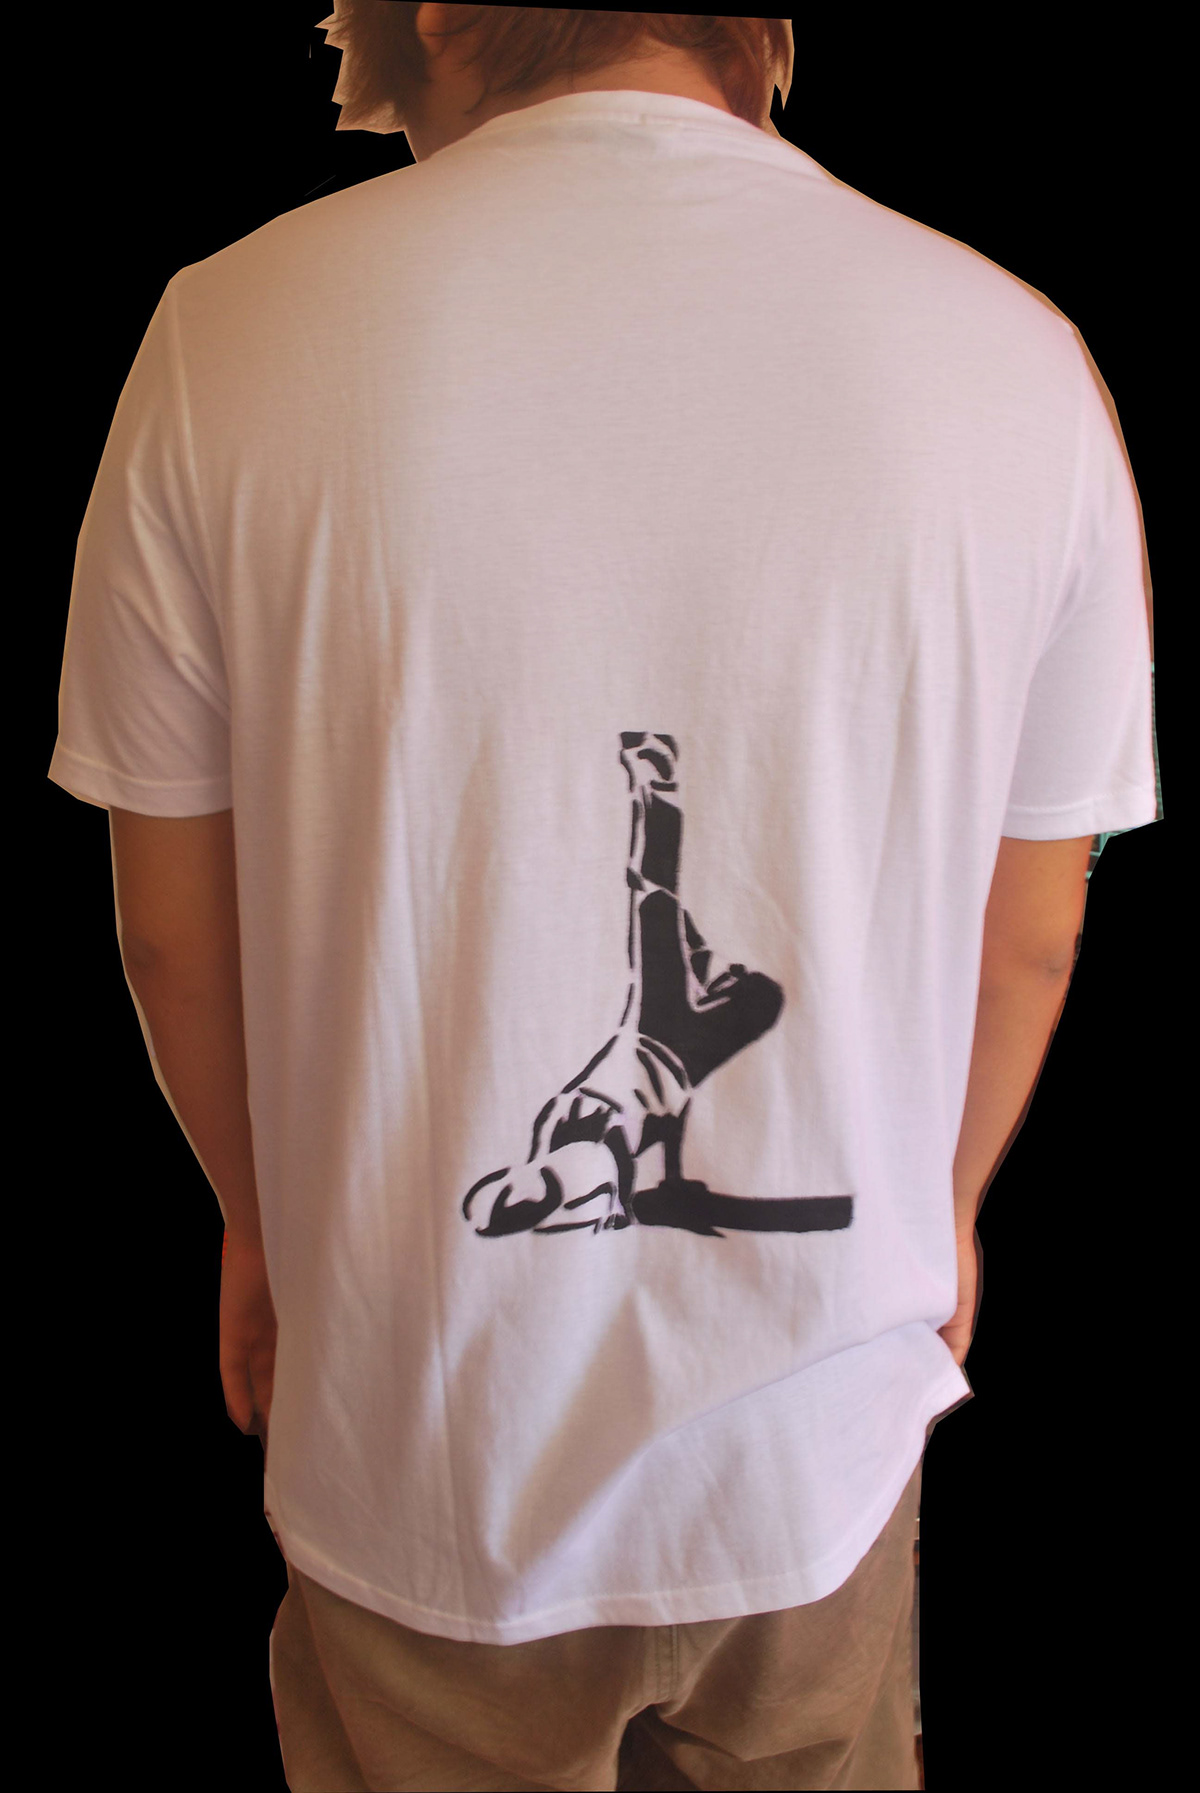 bboy tshirt save earth banner recycle